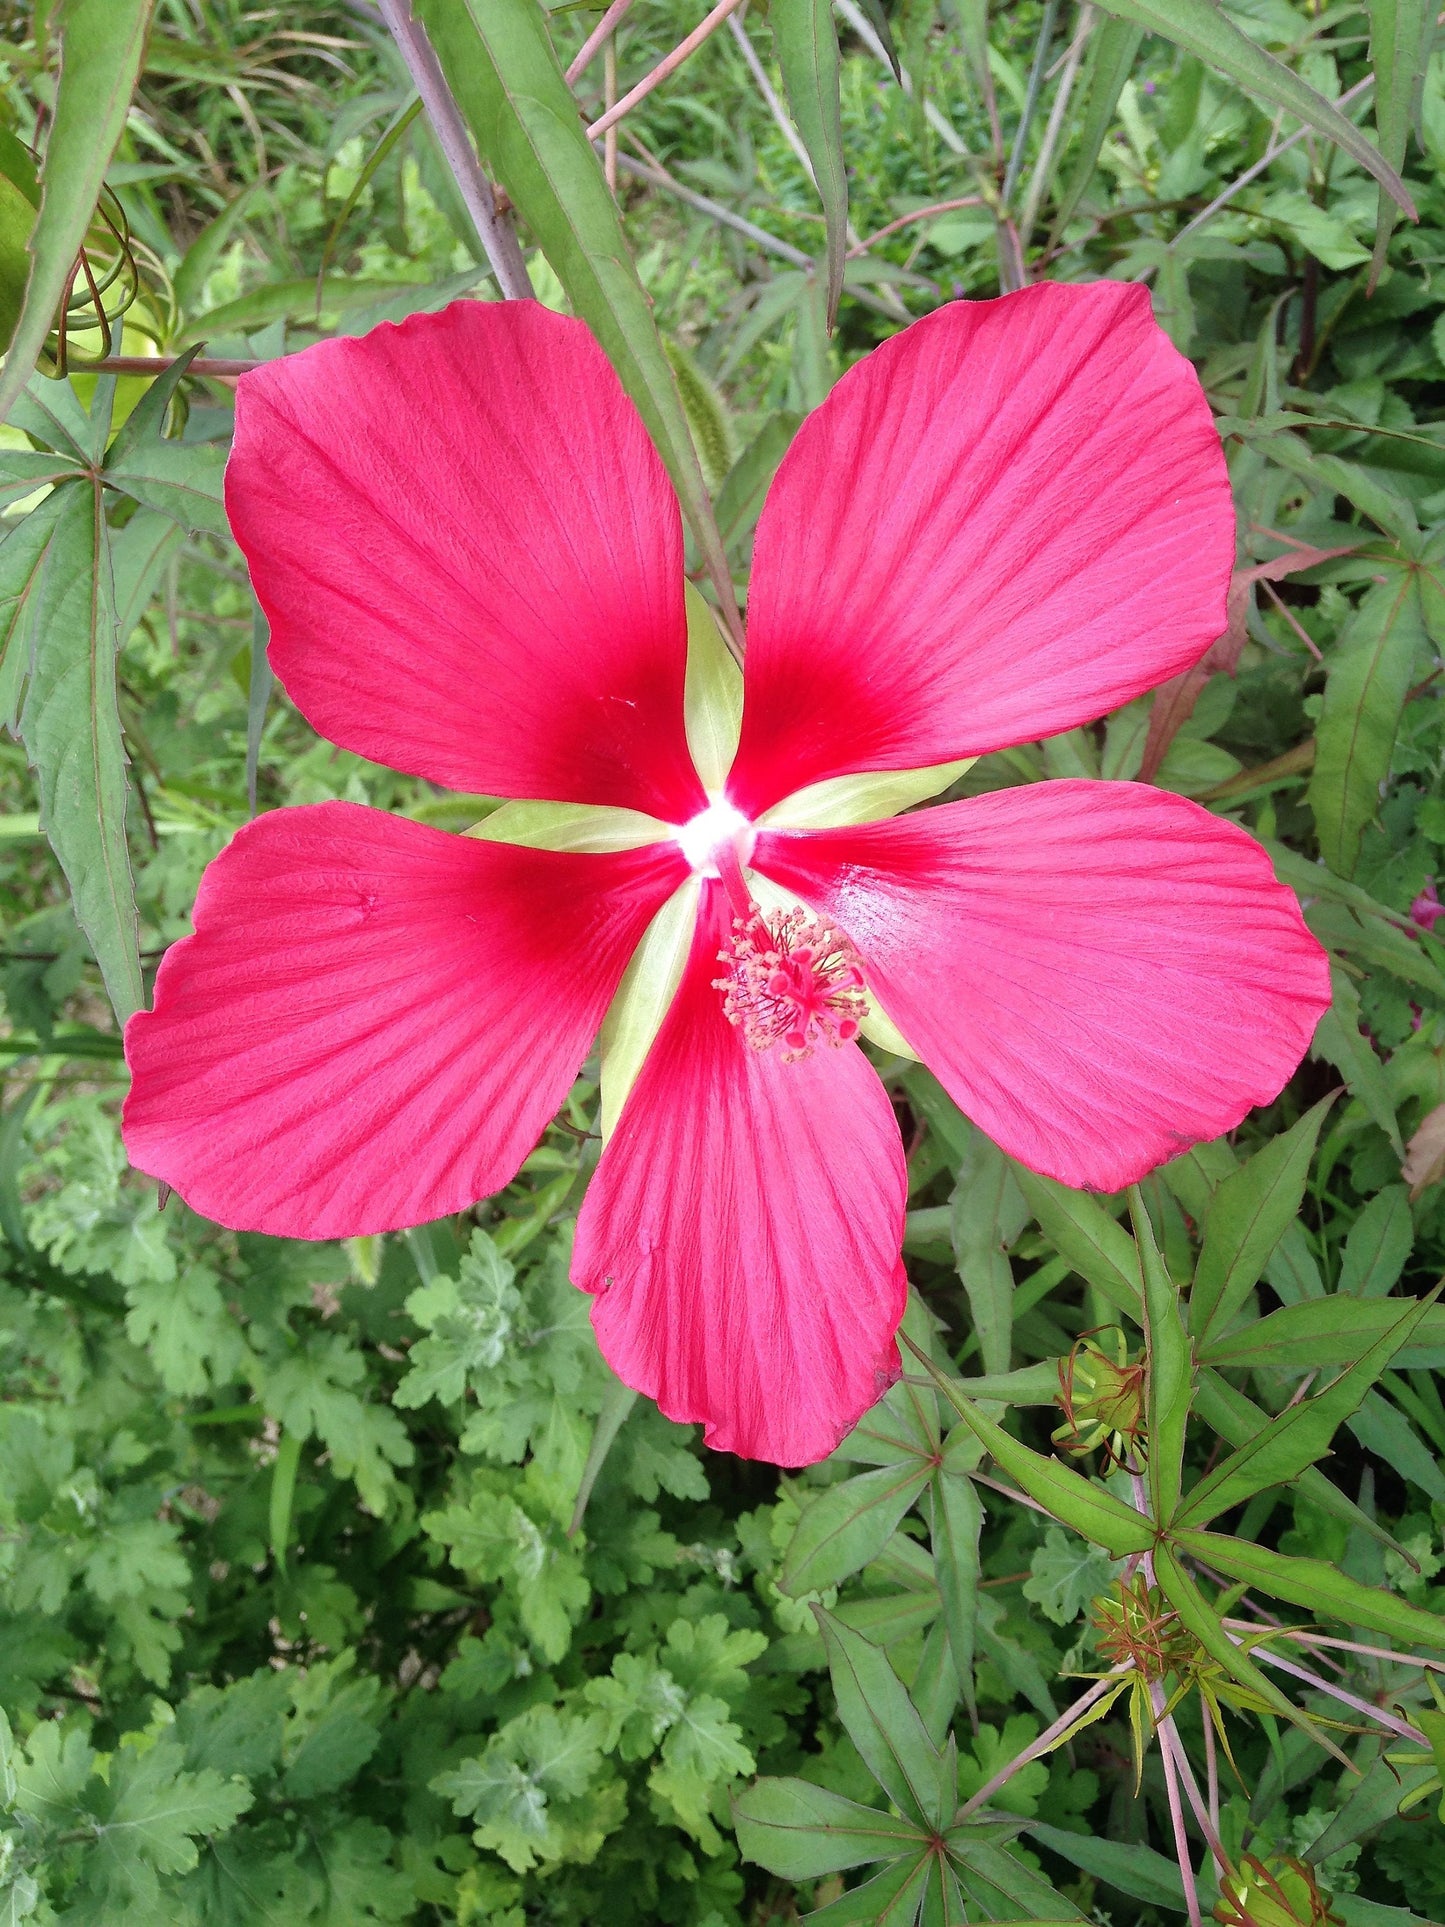 10 Red TEXAS STAR HIBISCUS Coccineus Scarlet Rosemallow Flower Seeds